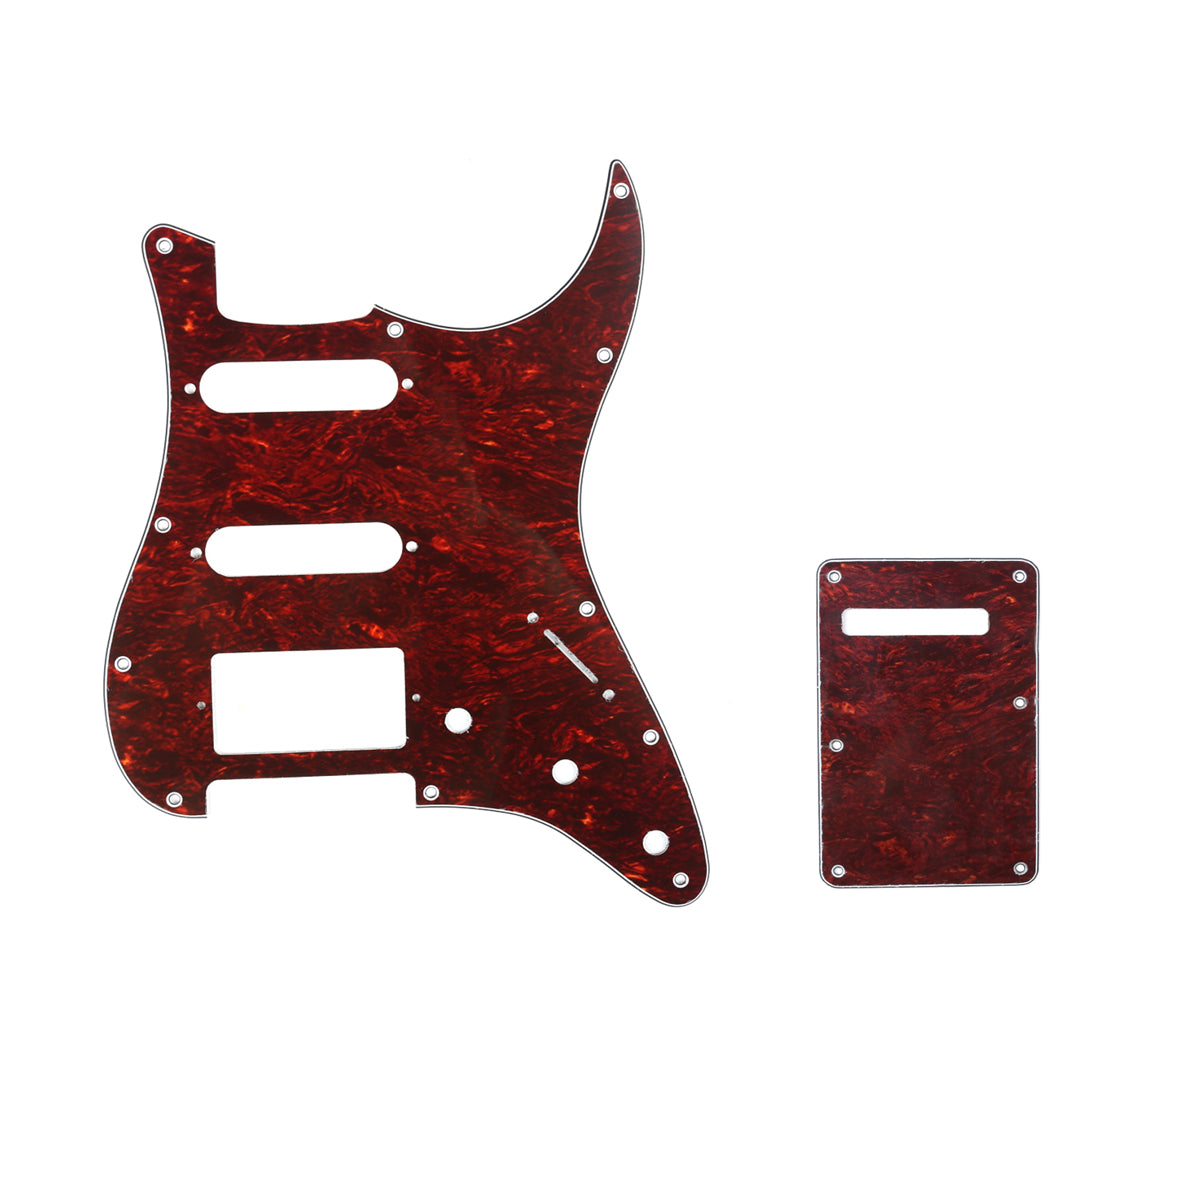 Musiclily SSH 11 Hole Strat Guitar Pickguard and BackPlate Set for Fender USA/Mexican Standard Stratocaster Modern Style, 4Ply Red Tortoise